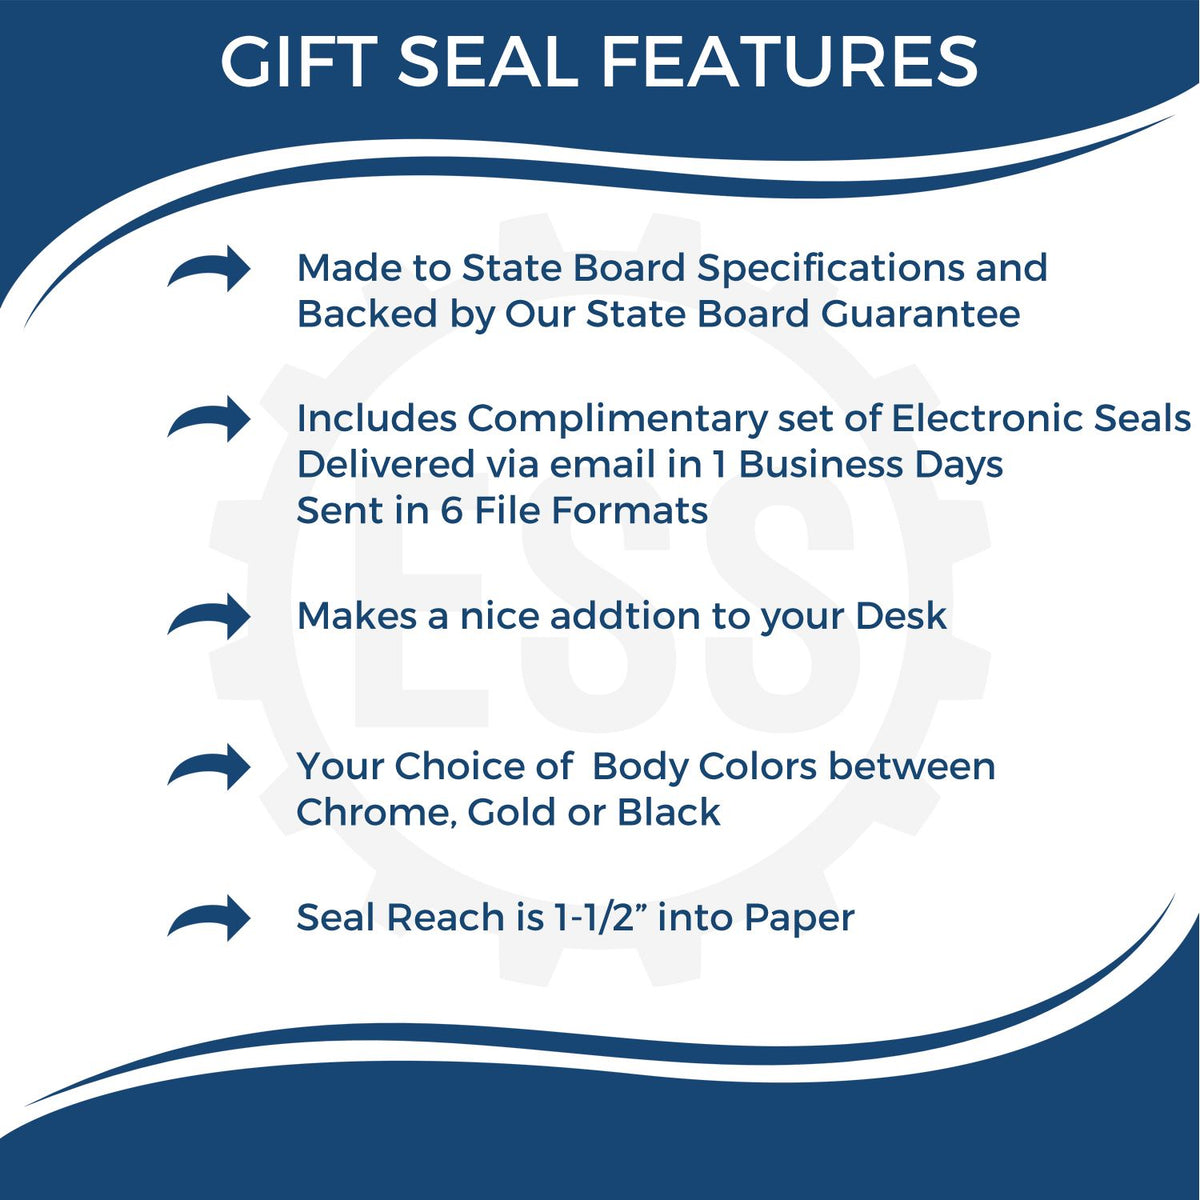 A picture of an infographic highlighting the selling points for the Gift Texas Geologist Seal